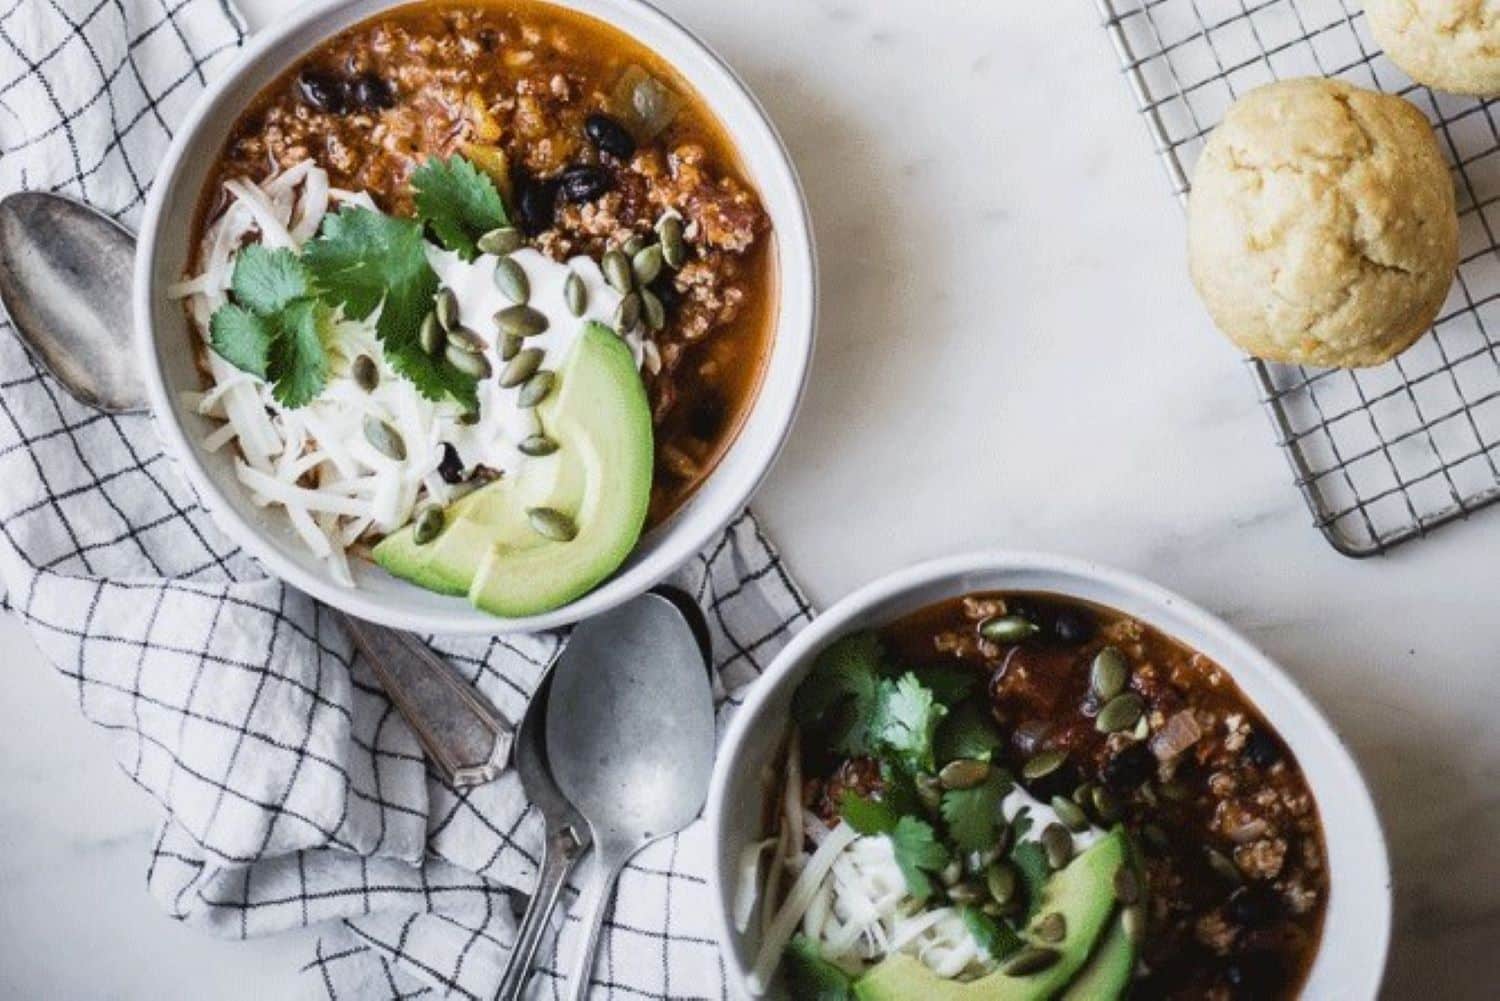 chili recipes for summer